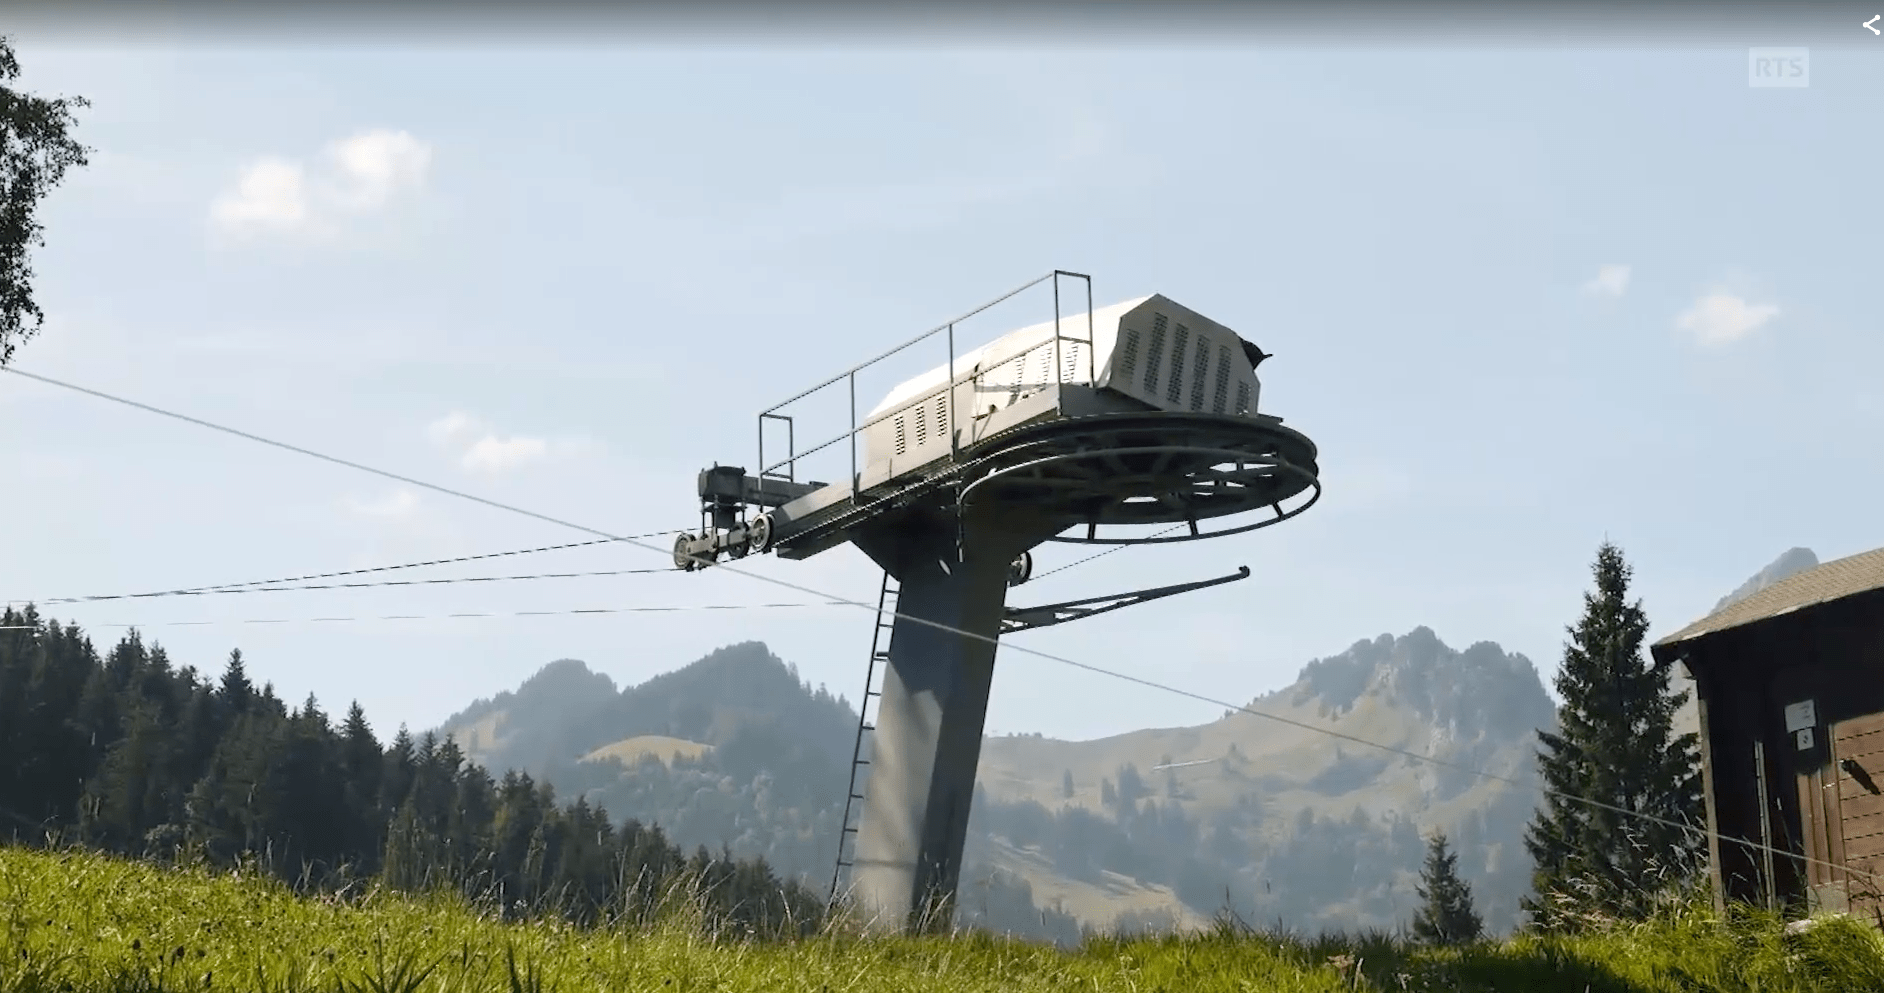 Going downhill: more than 50 Swiss ski lifts are rusting away - SWI